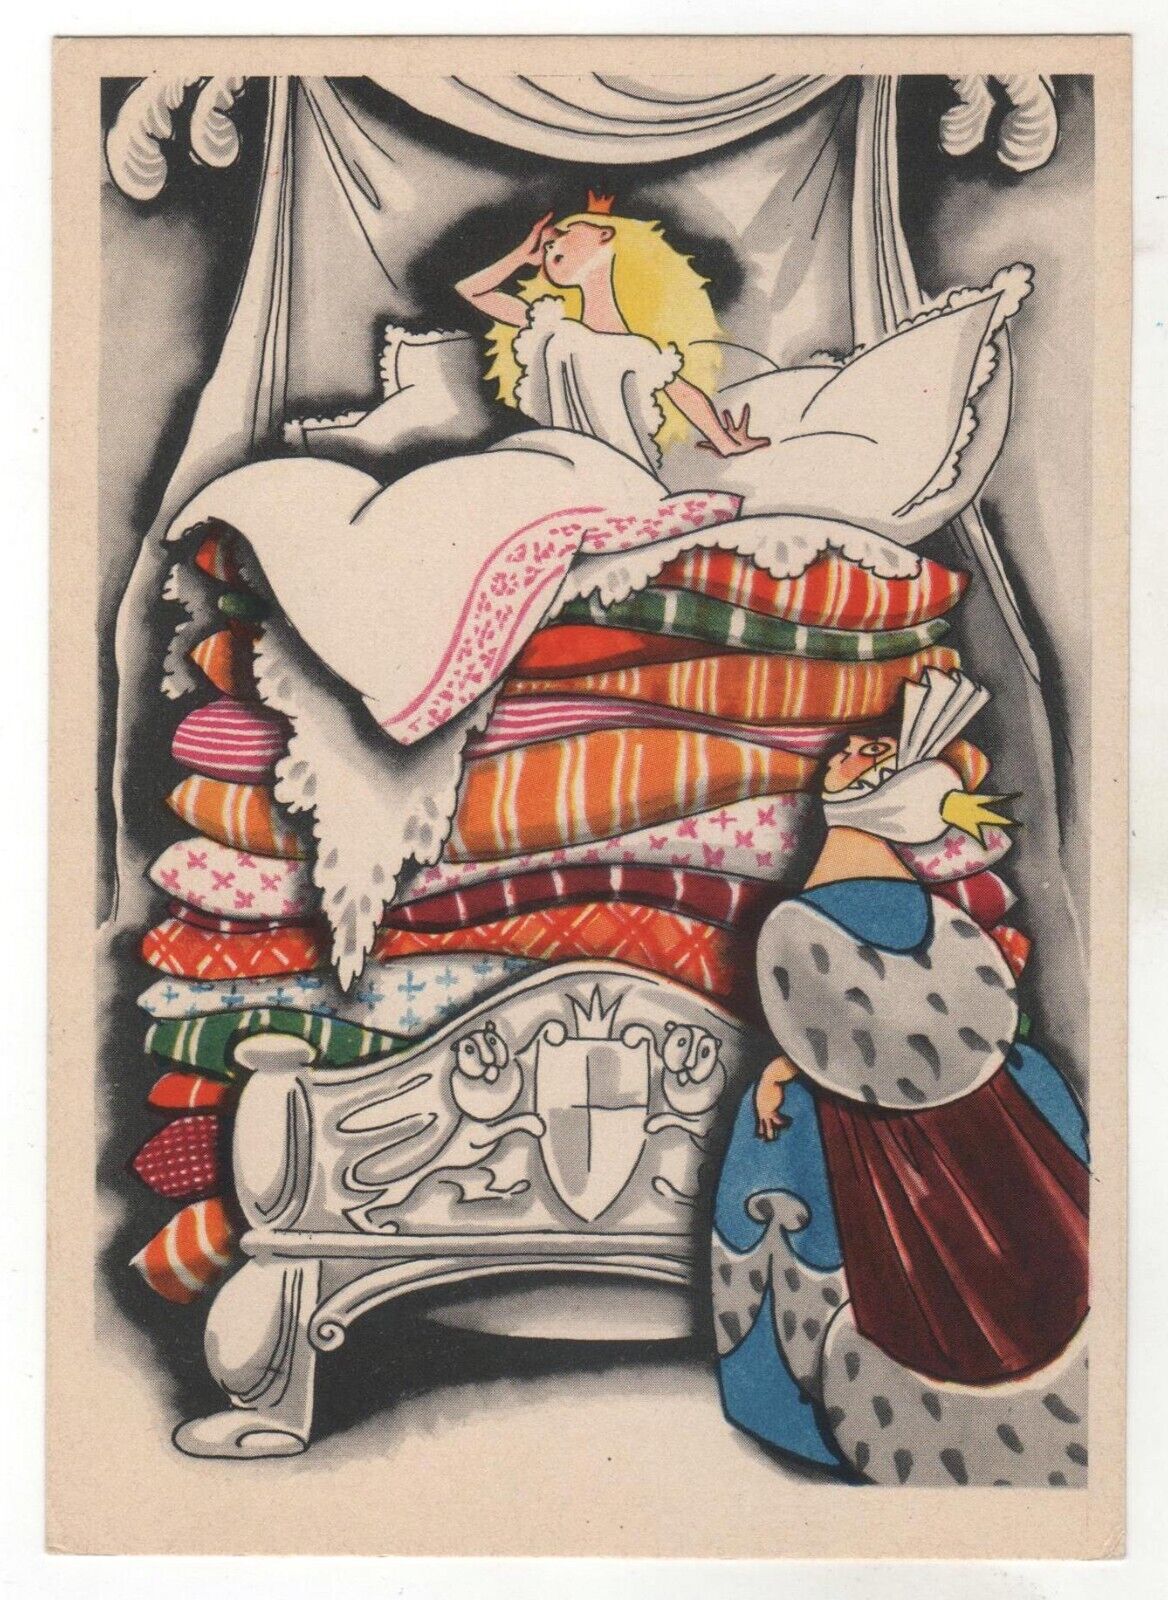 1963 Fairy Tale by Andersen Princess on the Pea ART Goltz Soviet POSTCARD Old